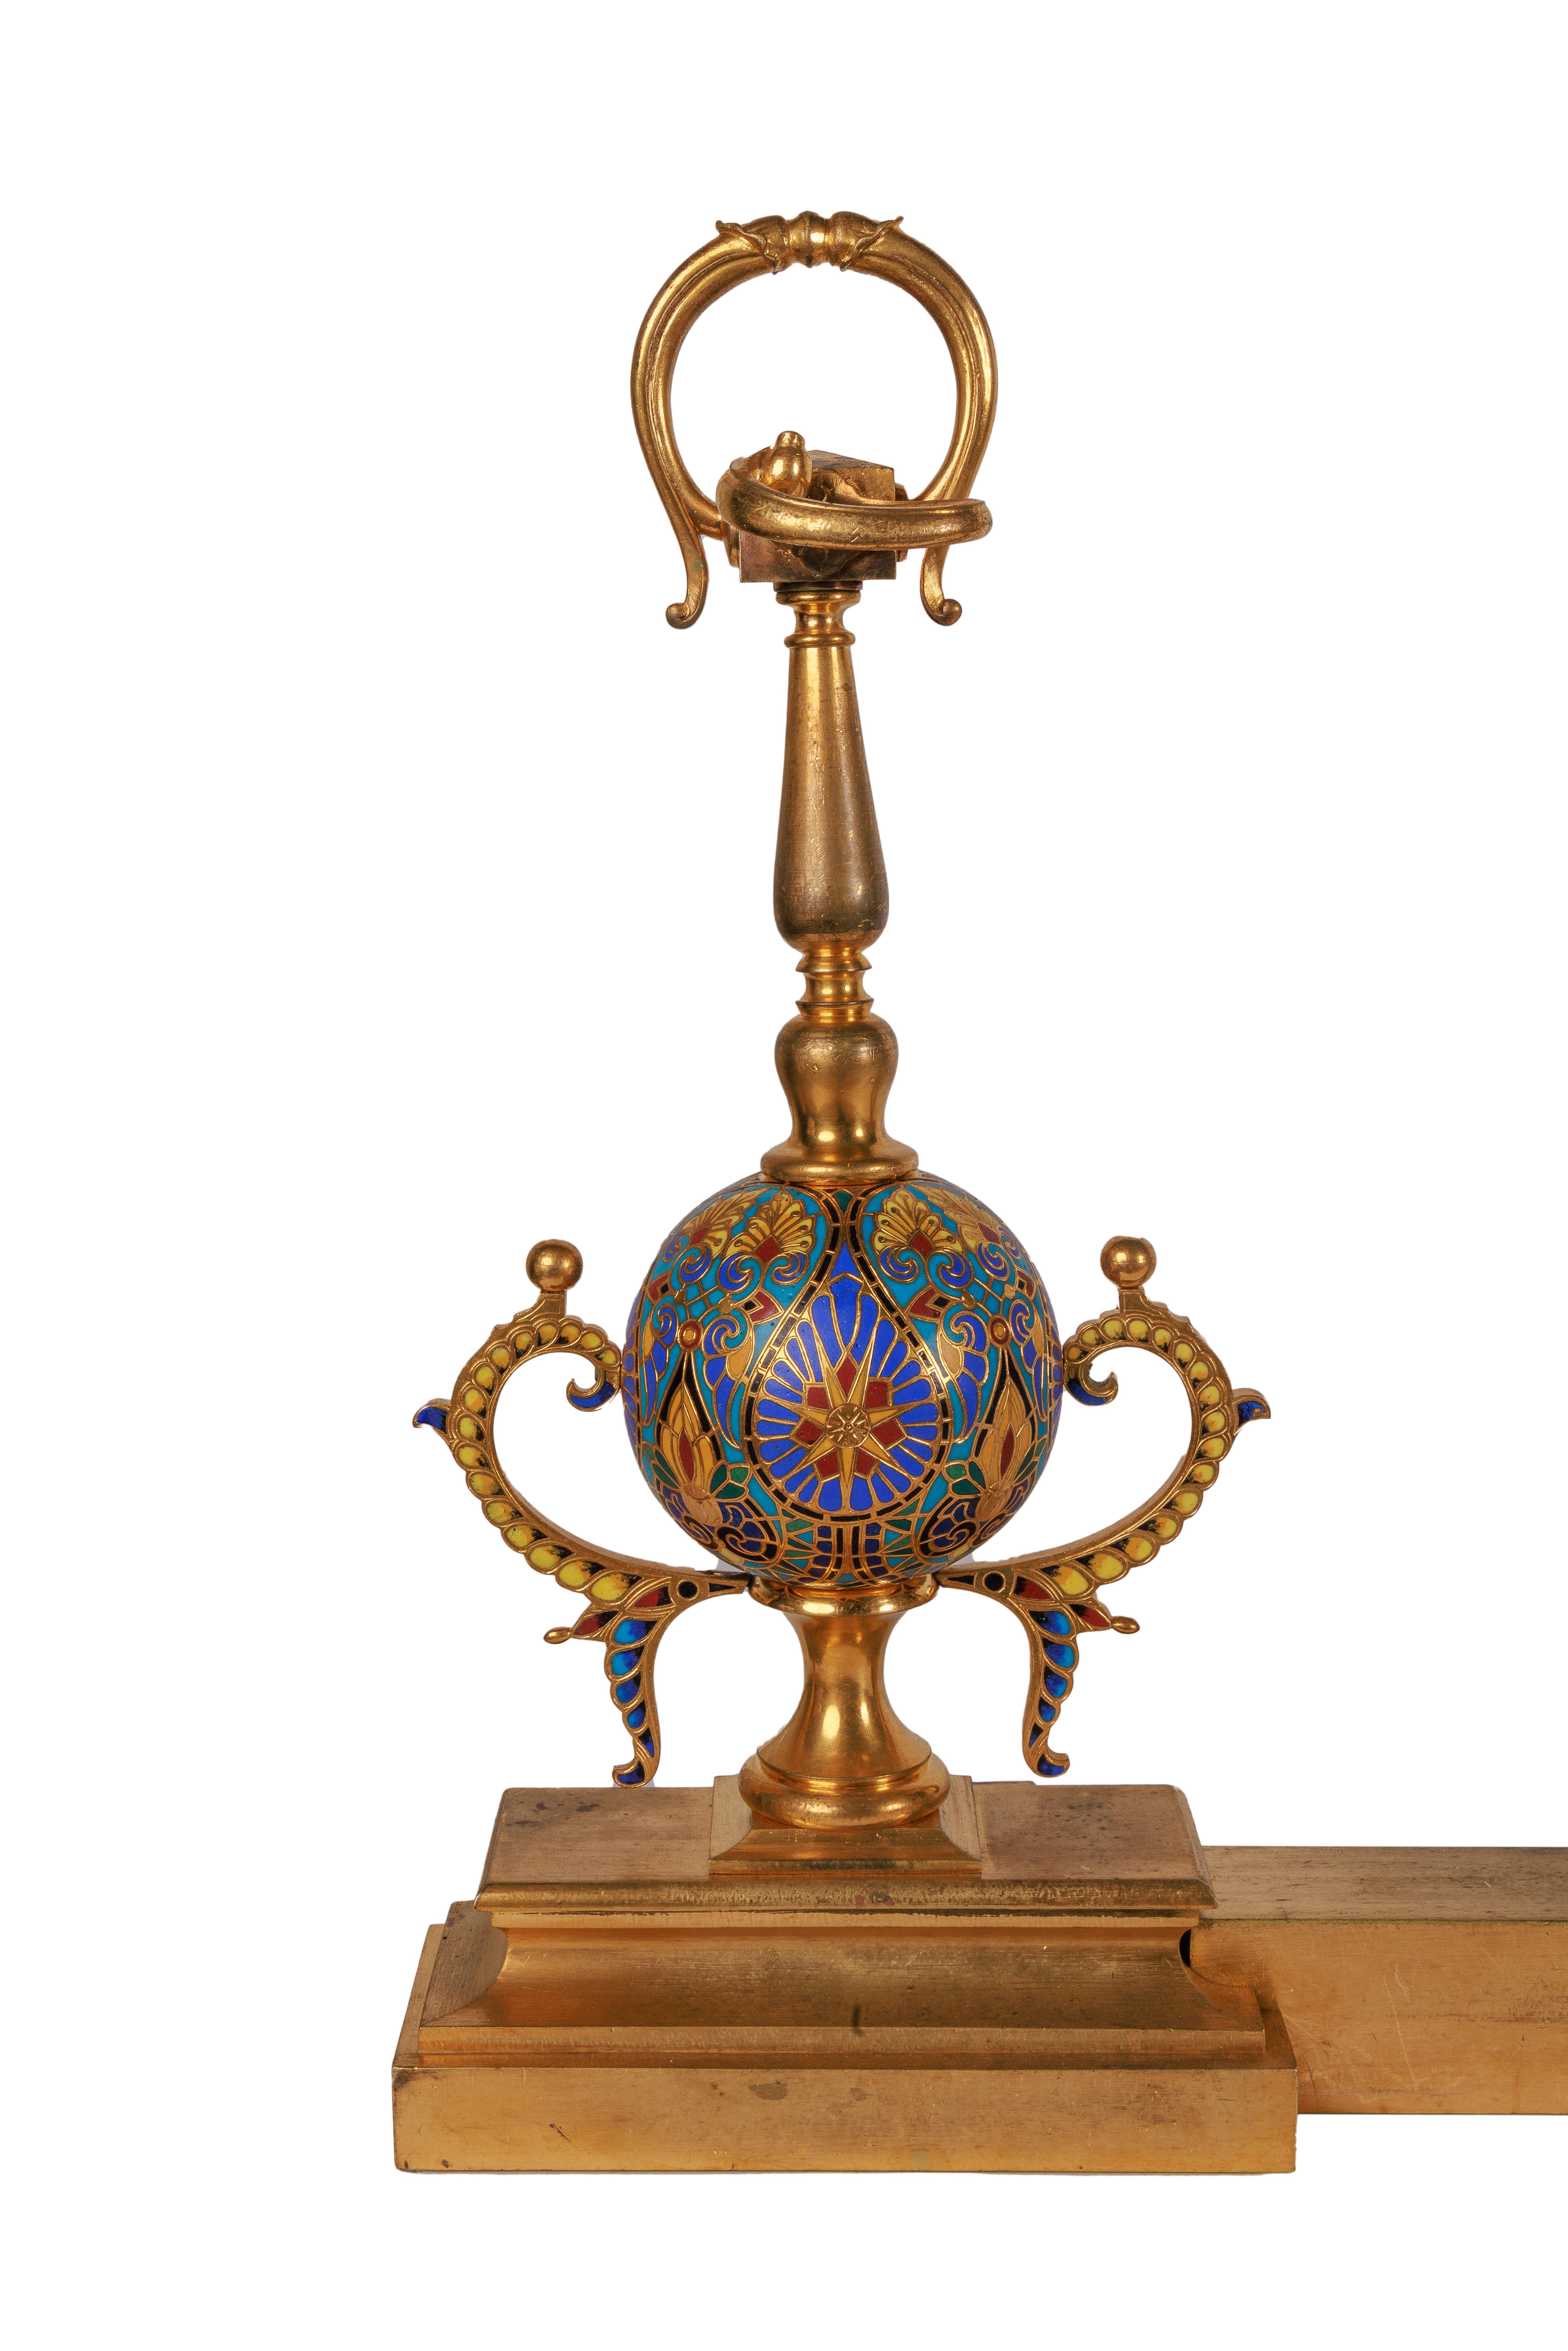 Napoleon III Ferdinand Barbedienne, A Pair of French Ormolu and Champleve Enamel Andirons For Sale